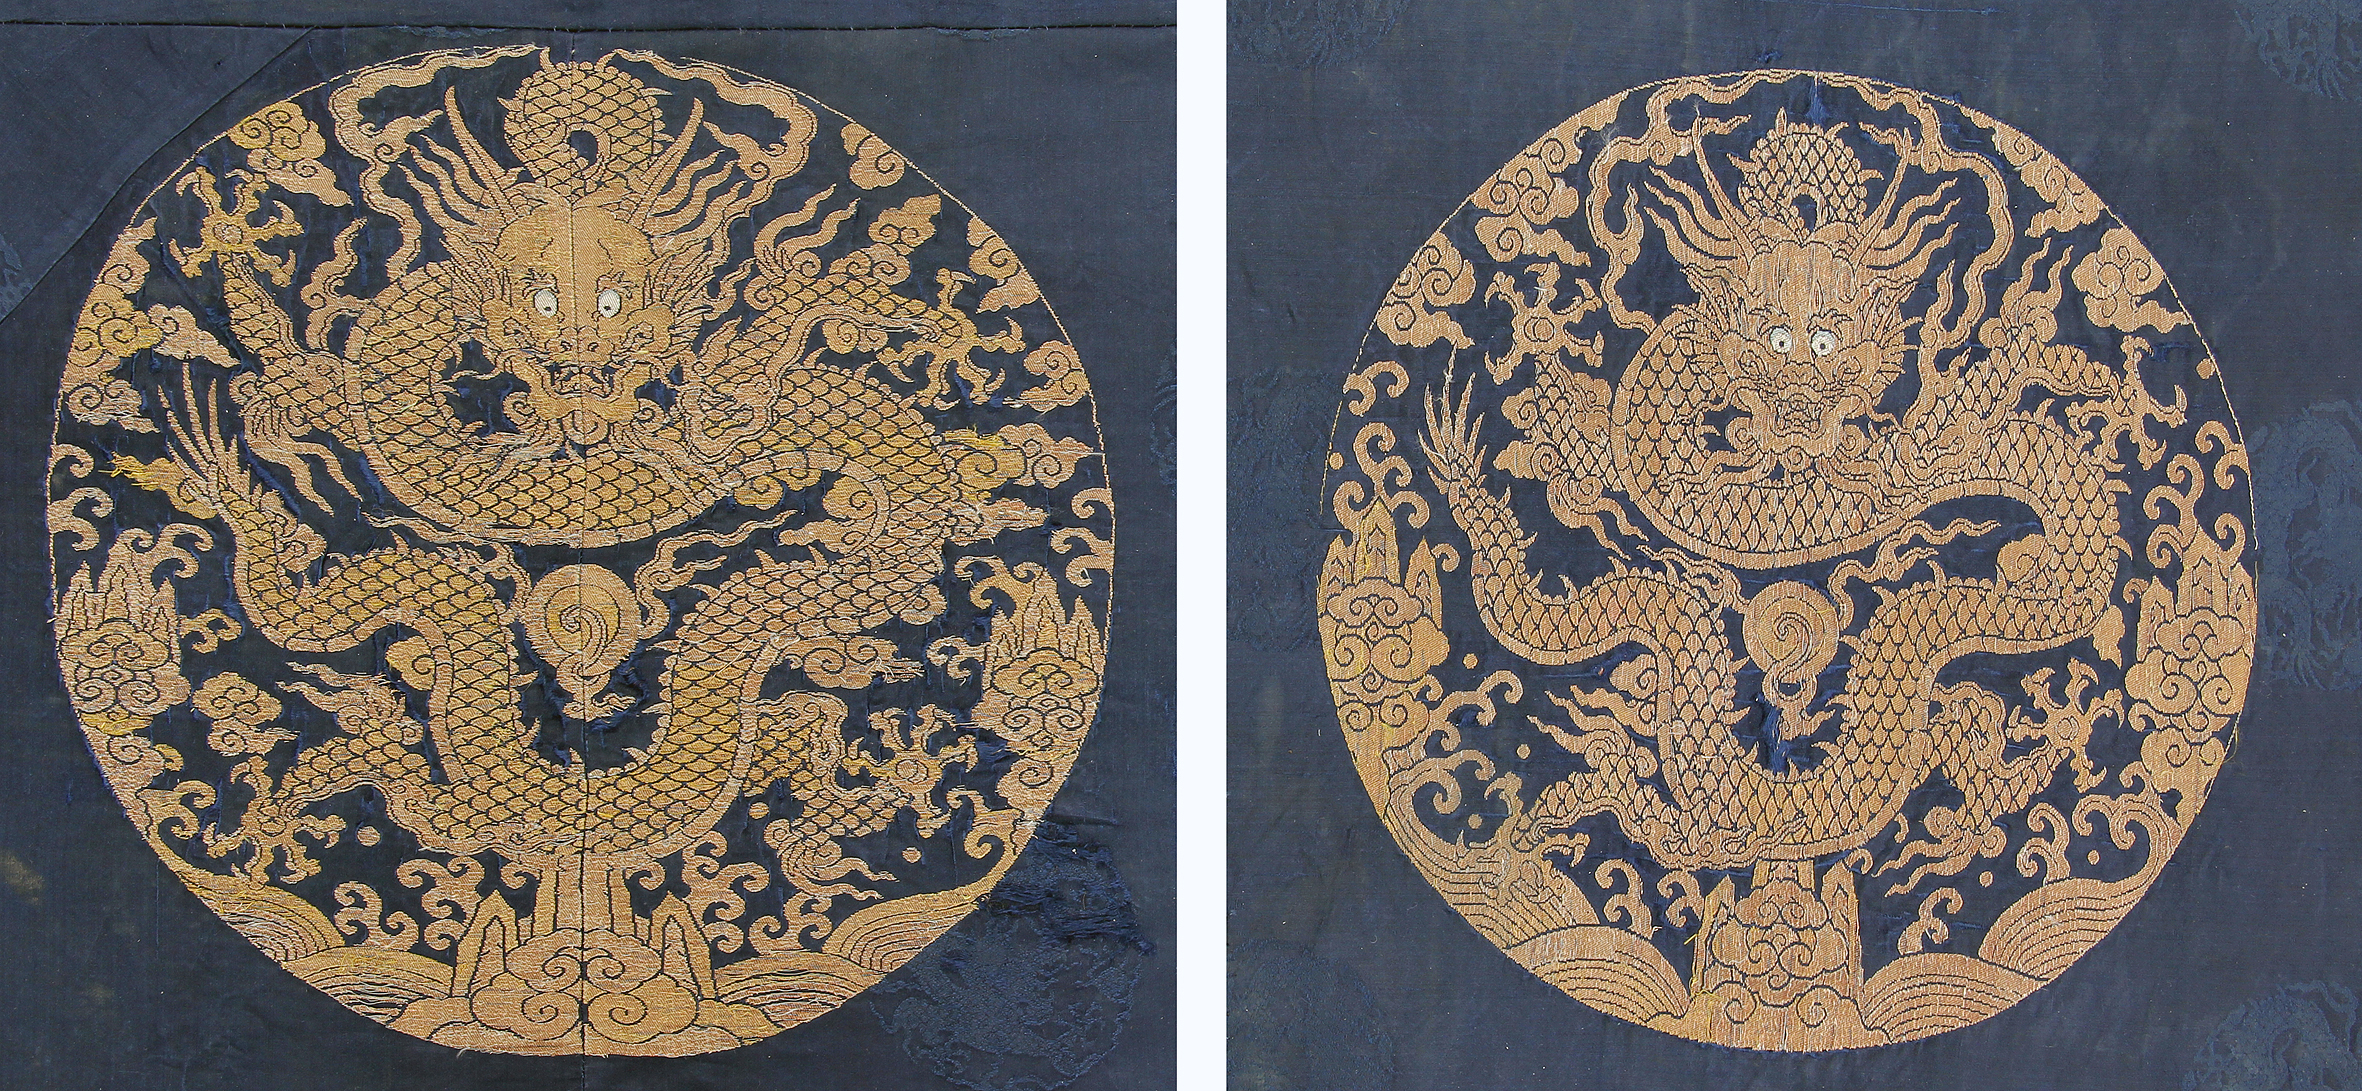 Imperial dragon roundels, 17th/18th century, China. Silk and gold thread. Galerie Arabesque, Stuttgart